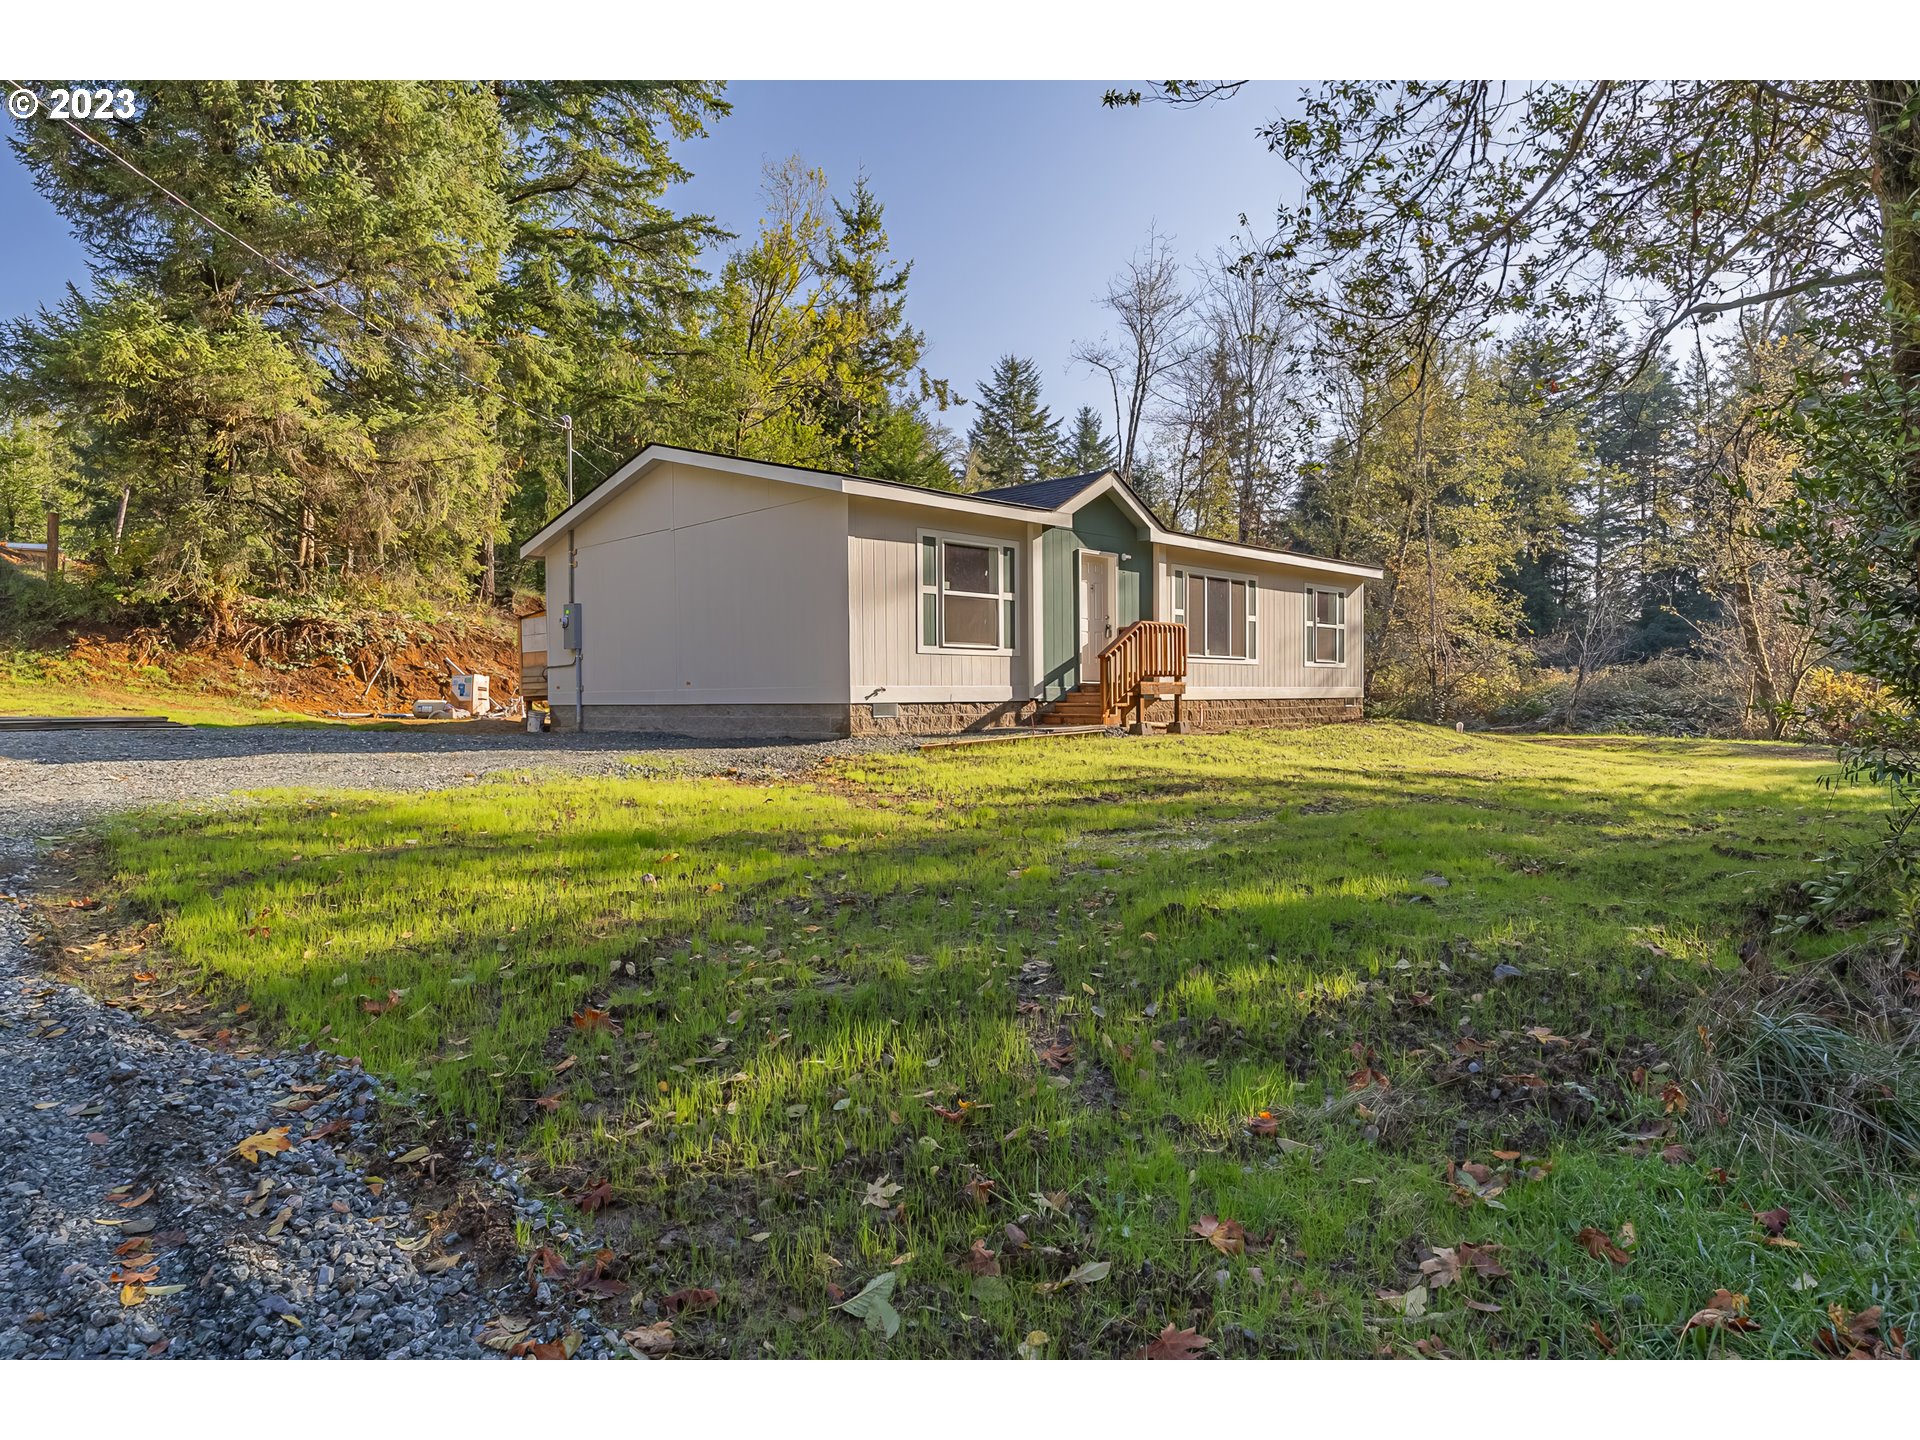 60857 CATCHING SLOUGH RD, Coos Bay, OR 